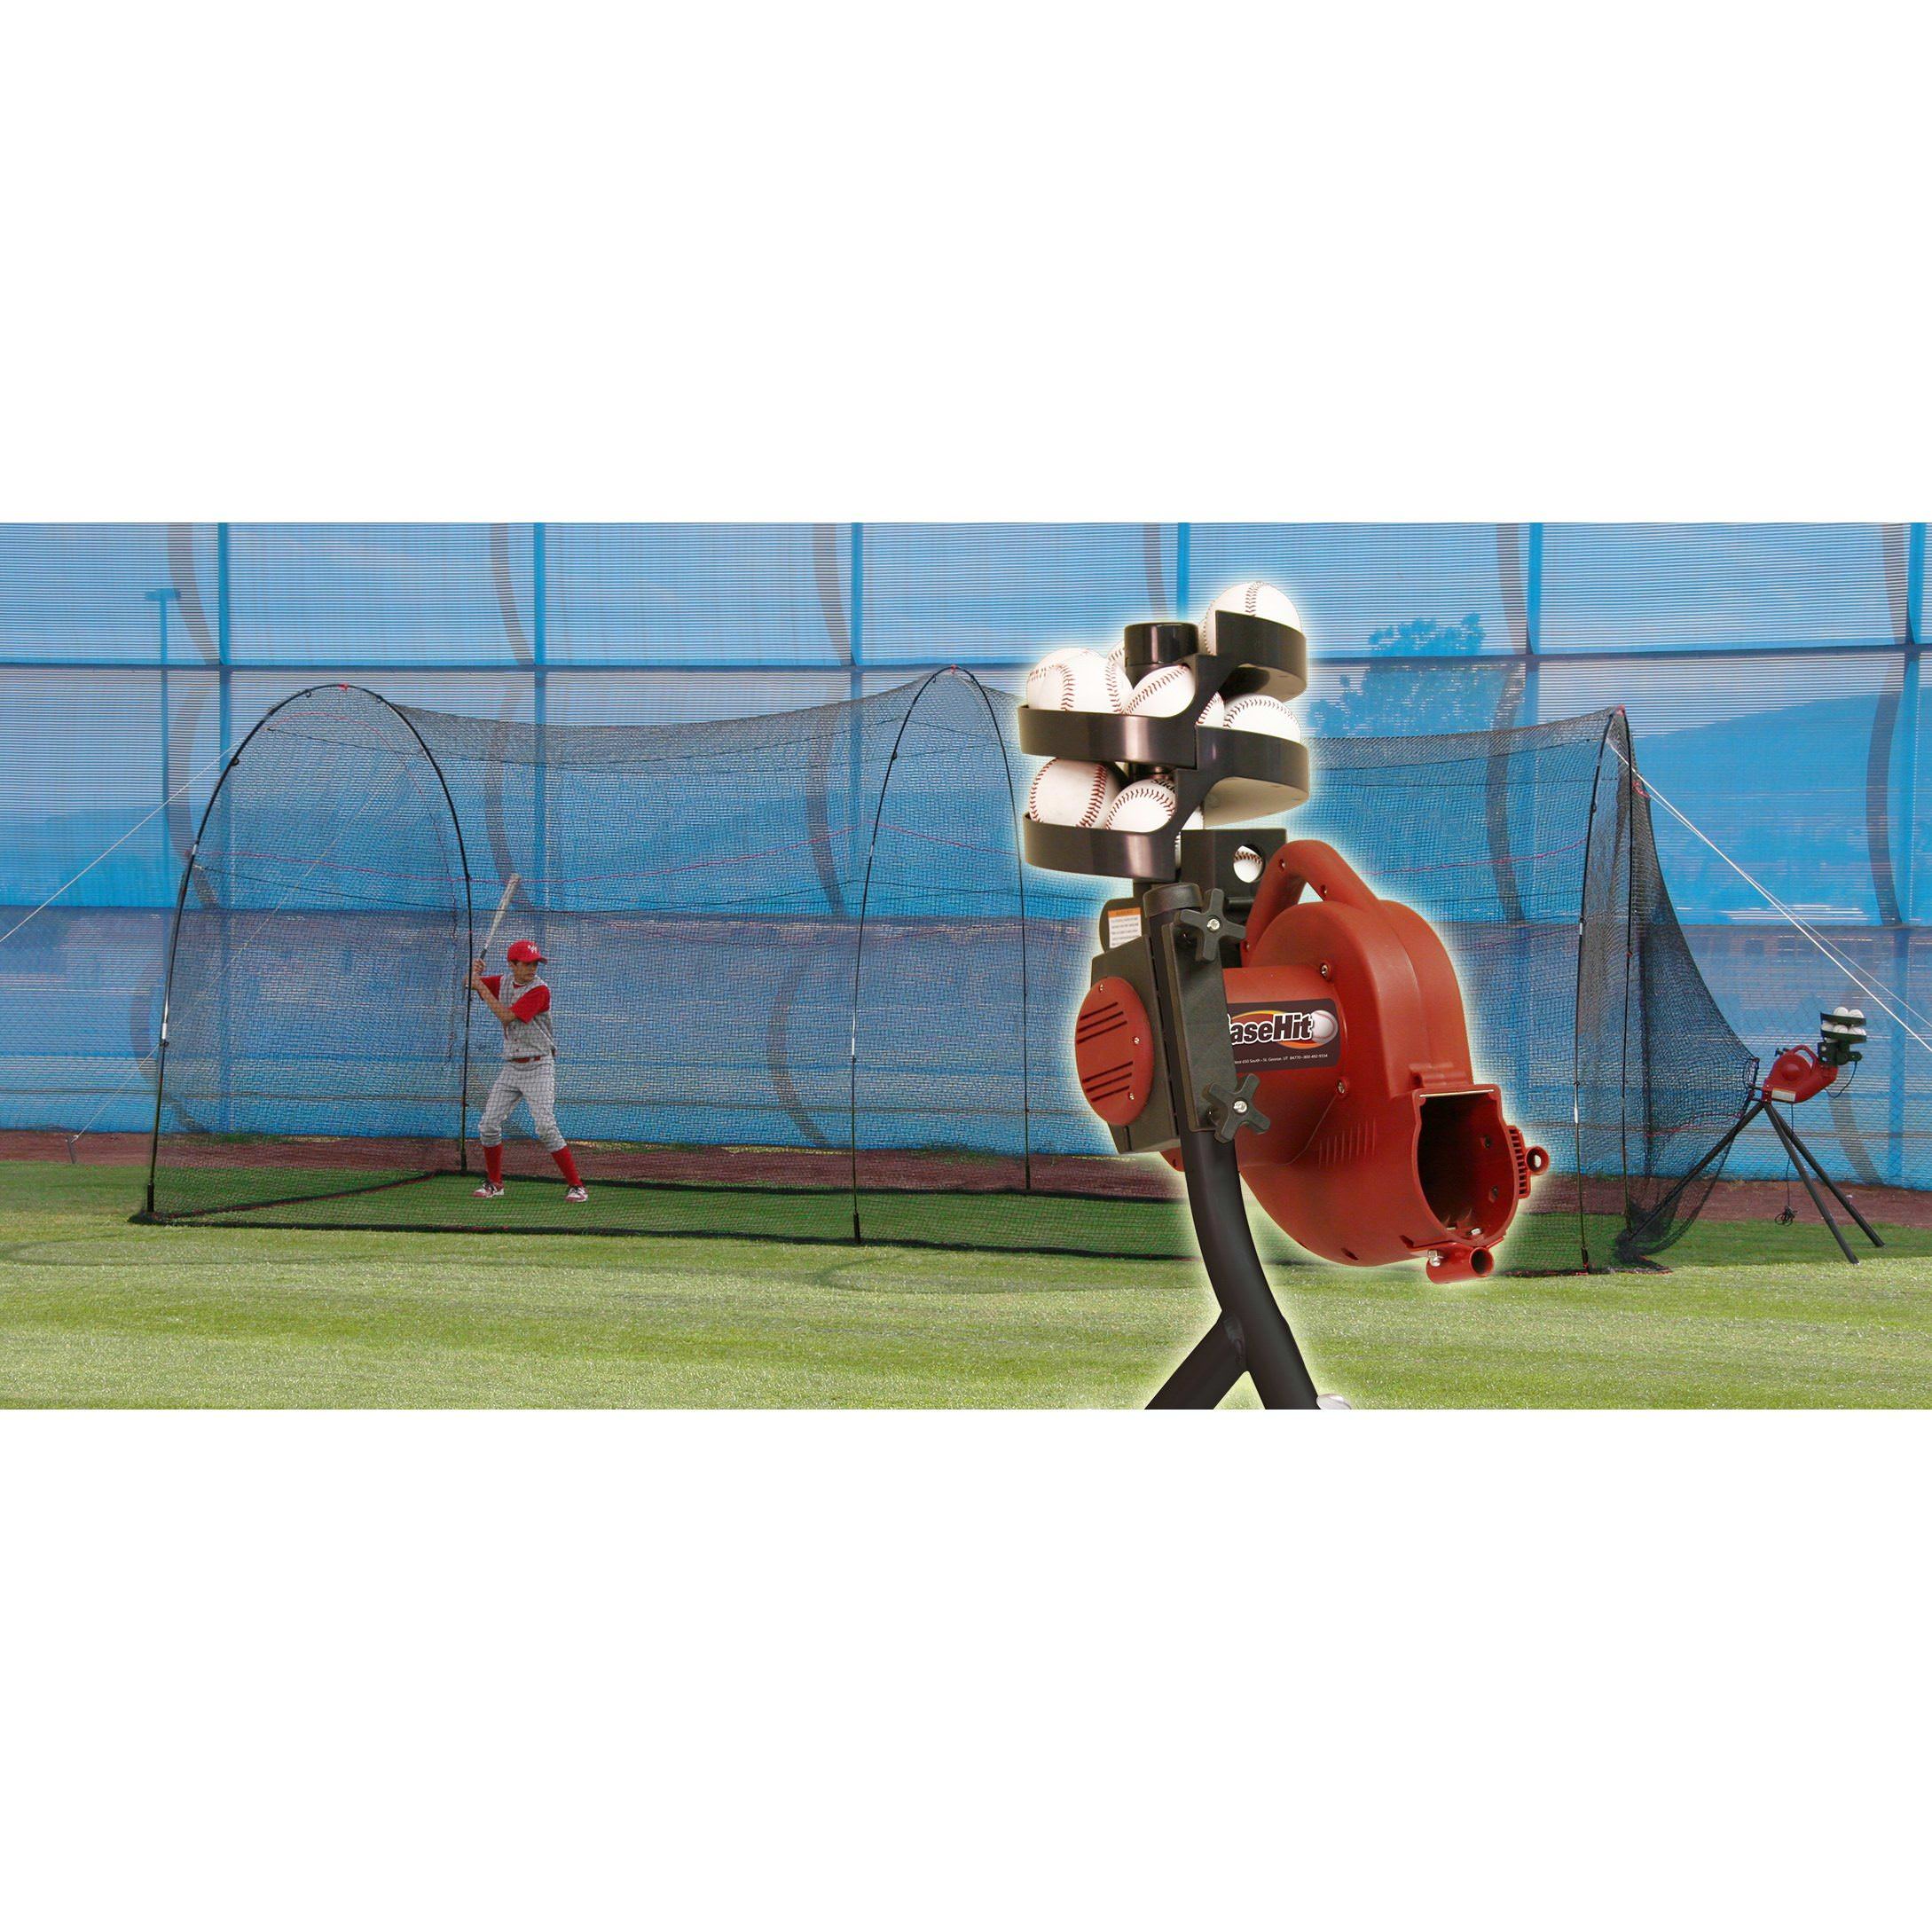 Heater Sports BaseHit & PowerAlley 22' Batting Cage Kit